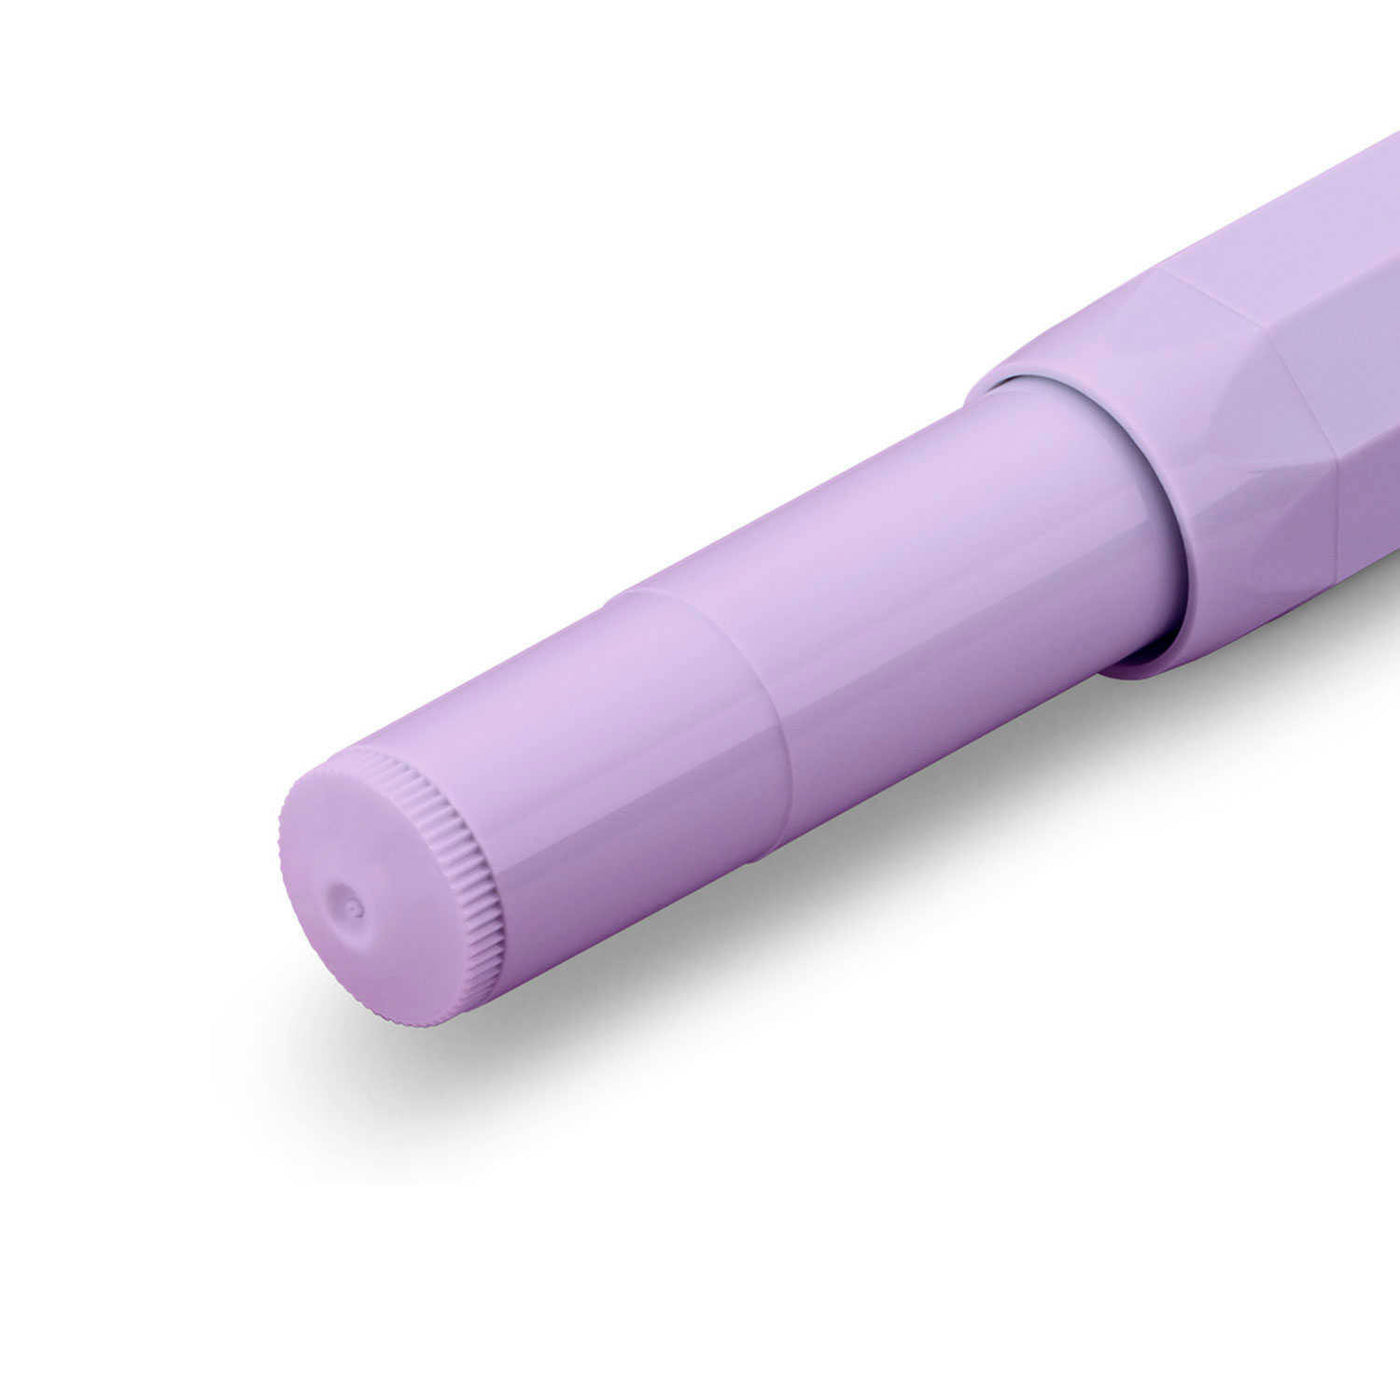 Kaweco Collection Fountain Pen with Optional Clip - Light Lavender (Special Edition) 5